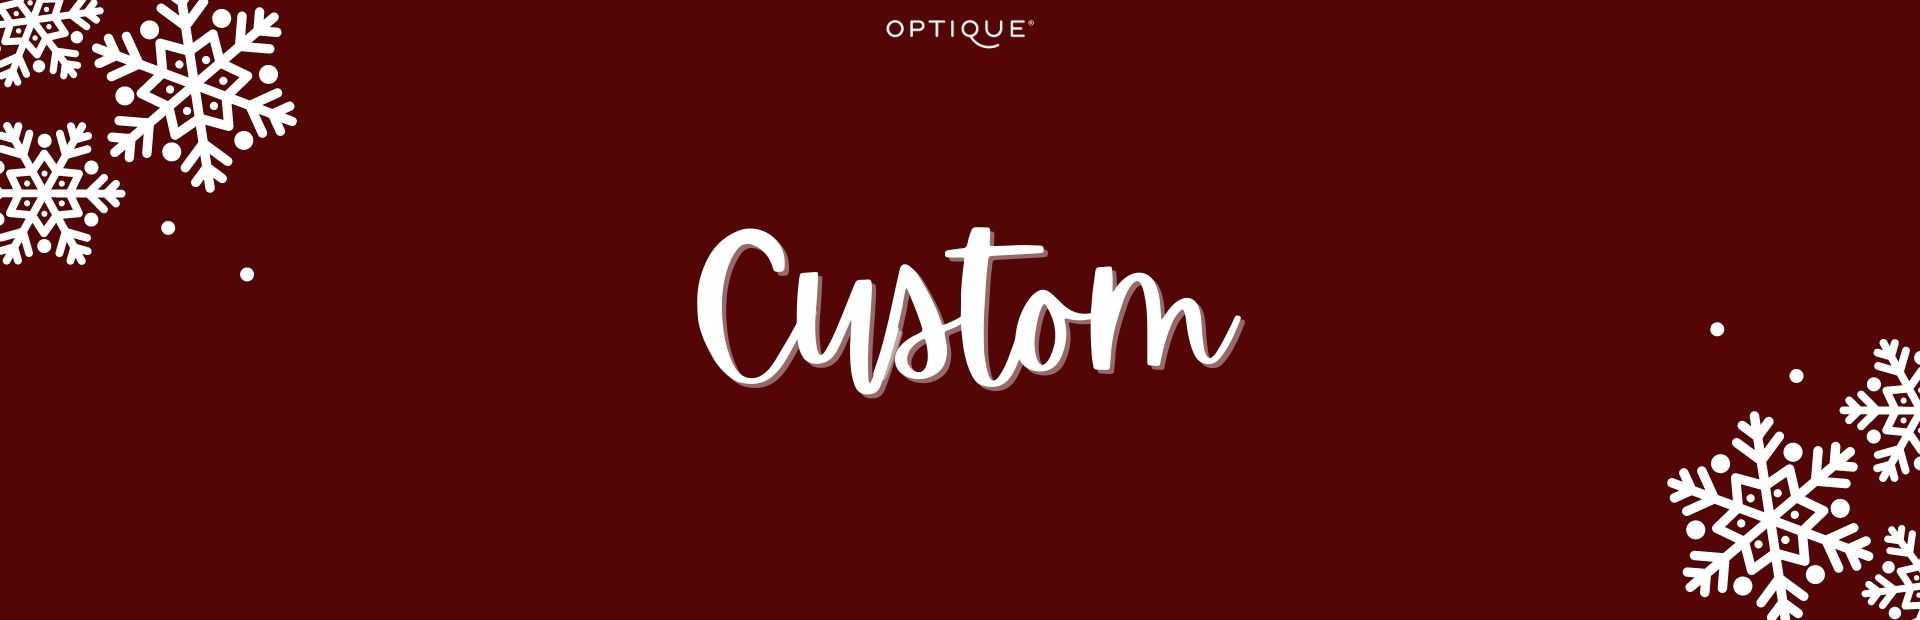 Customize your Ray-Ban and Oakley - Custom models in Opticue